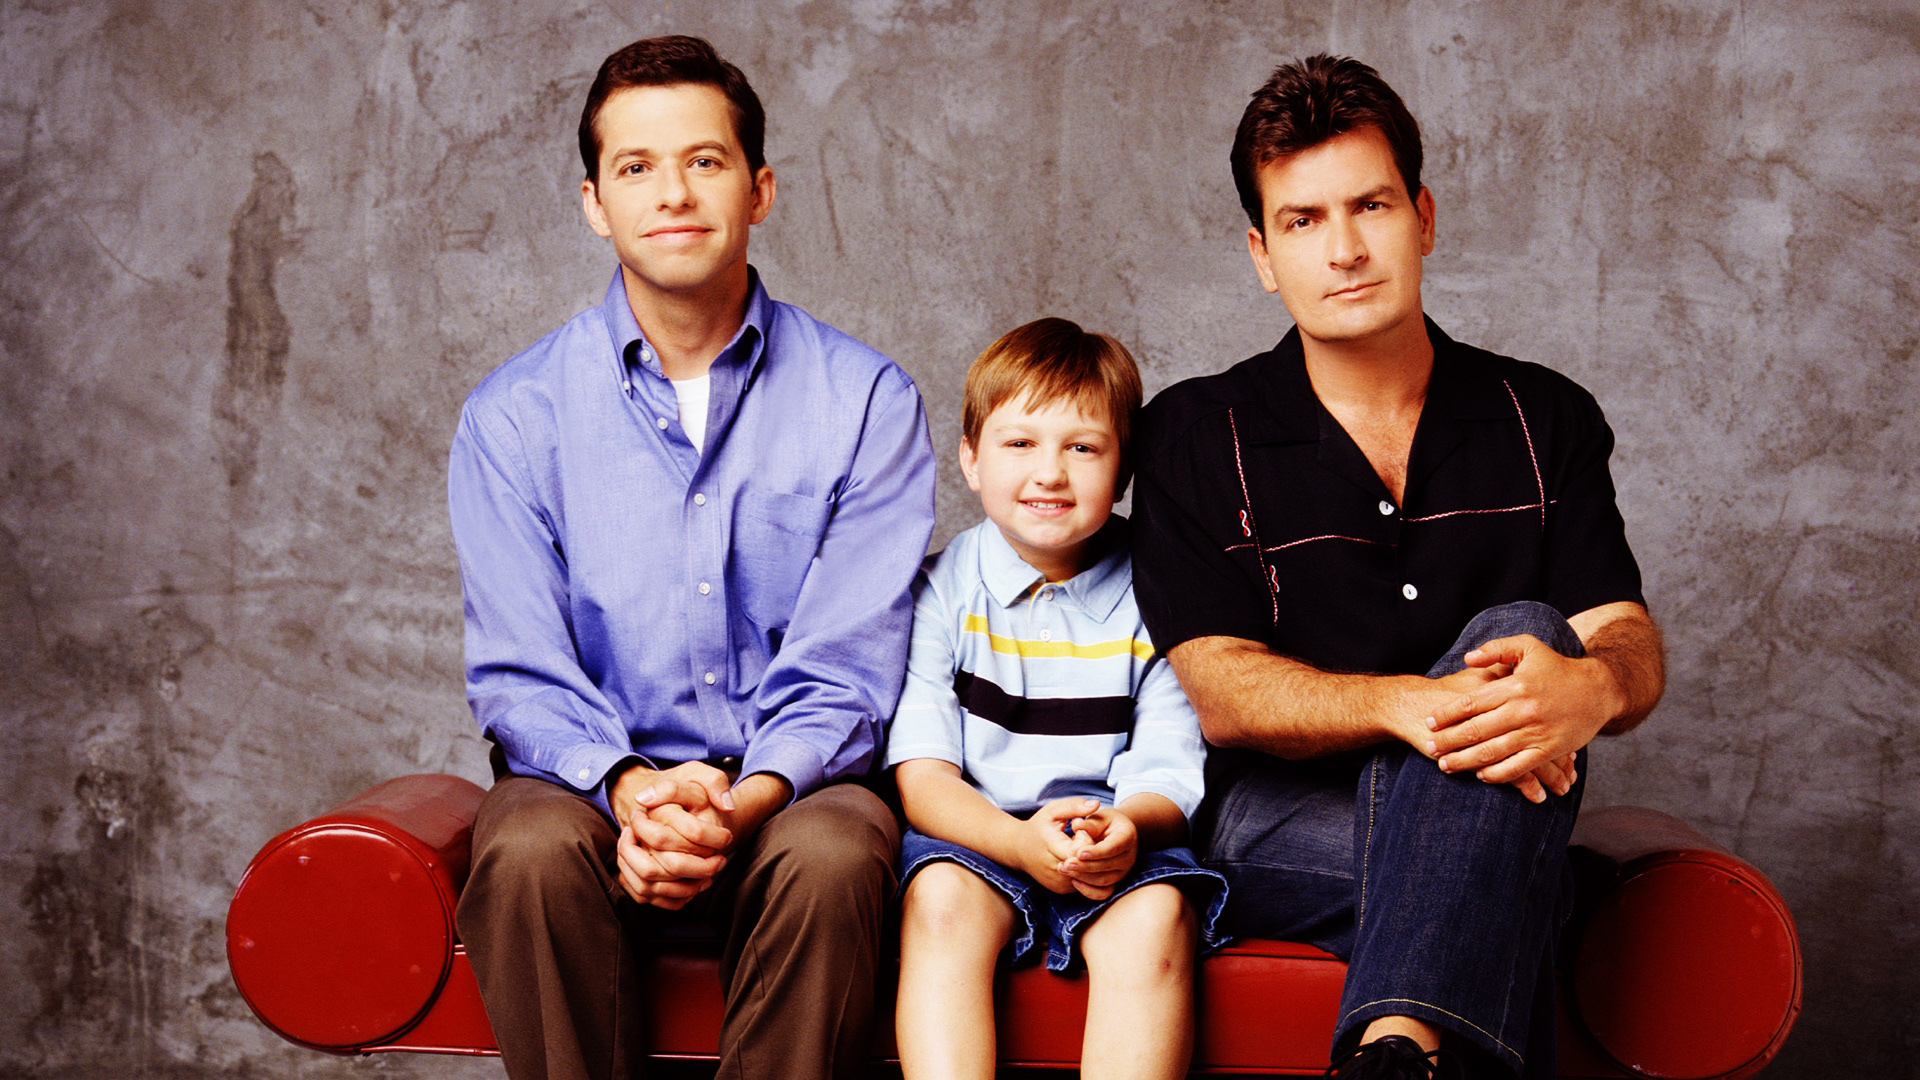 two and a half men, tv show